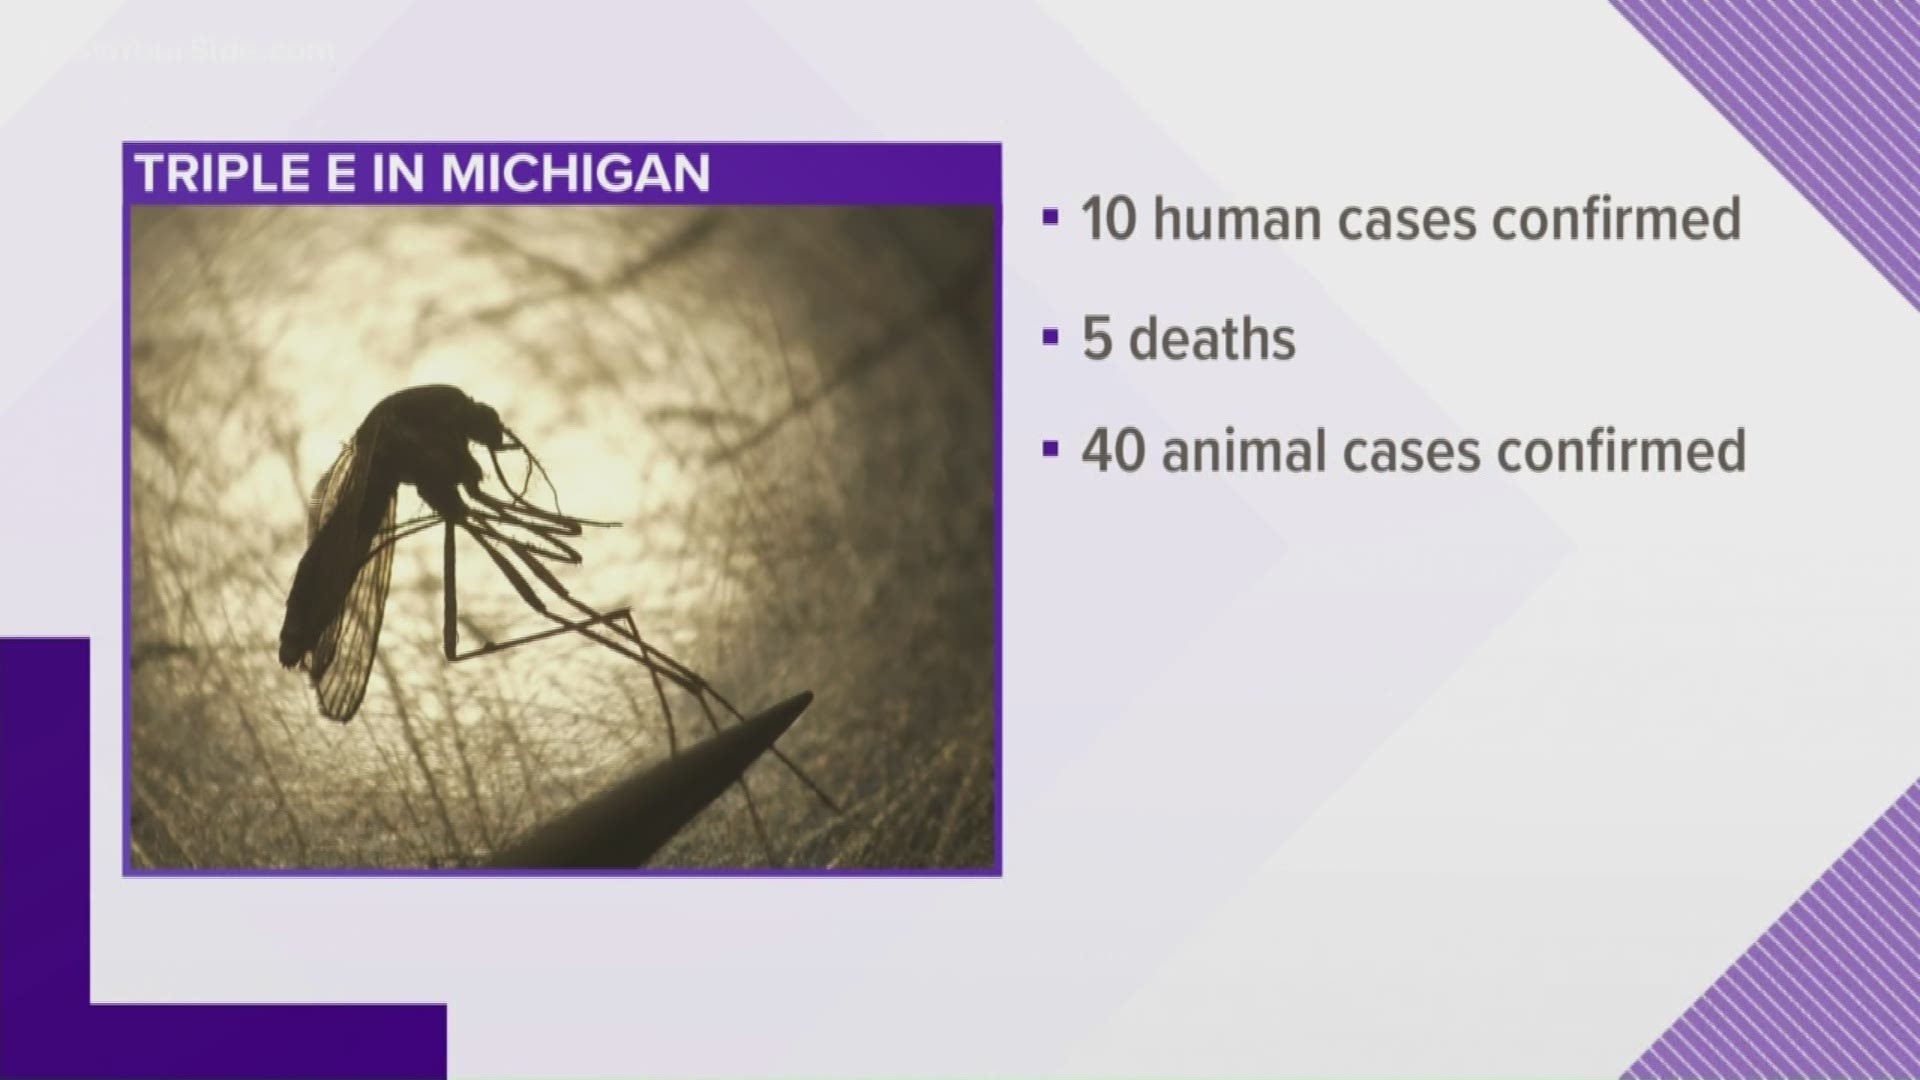 State health officials said a 5th person has died from EEE. There have been 10 human cases this year in Michigan.